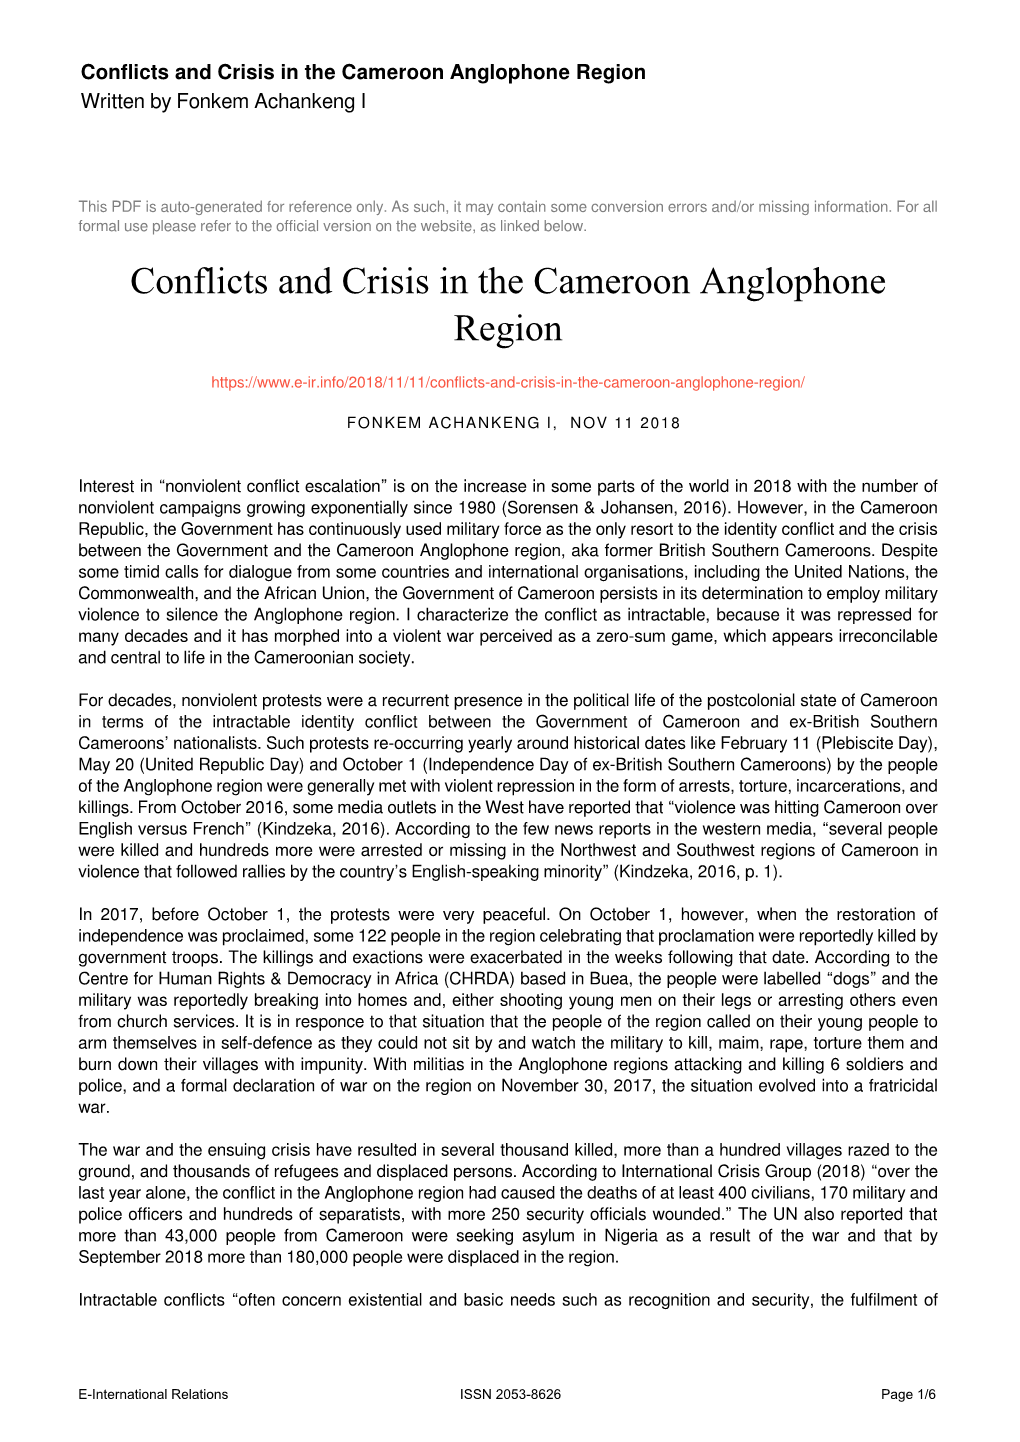 Conflicts and Crisis in the Cameroon Anglophone Region Written by Fonkem Achankeng I